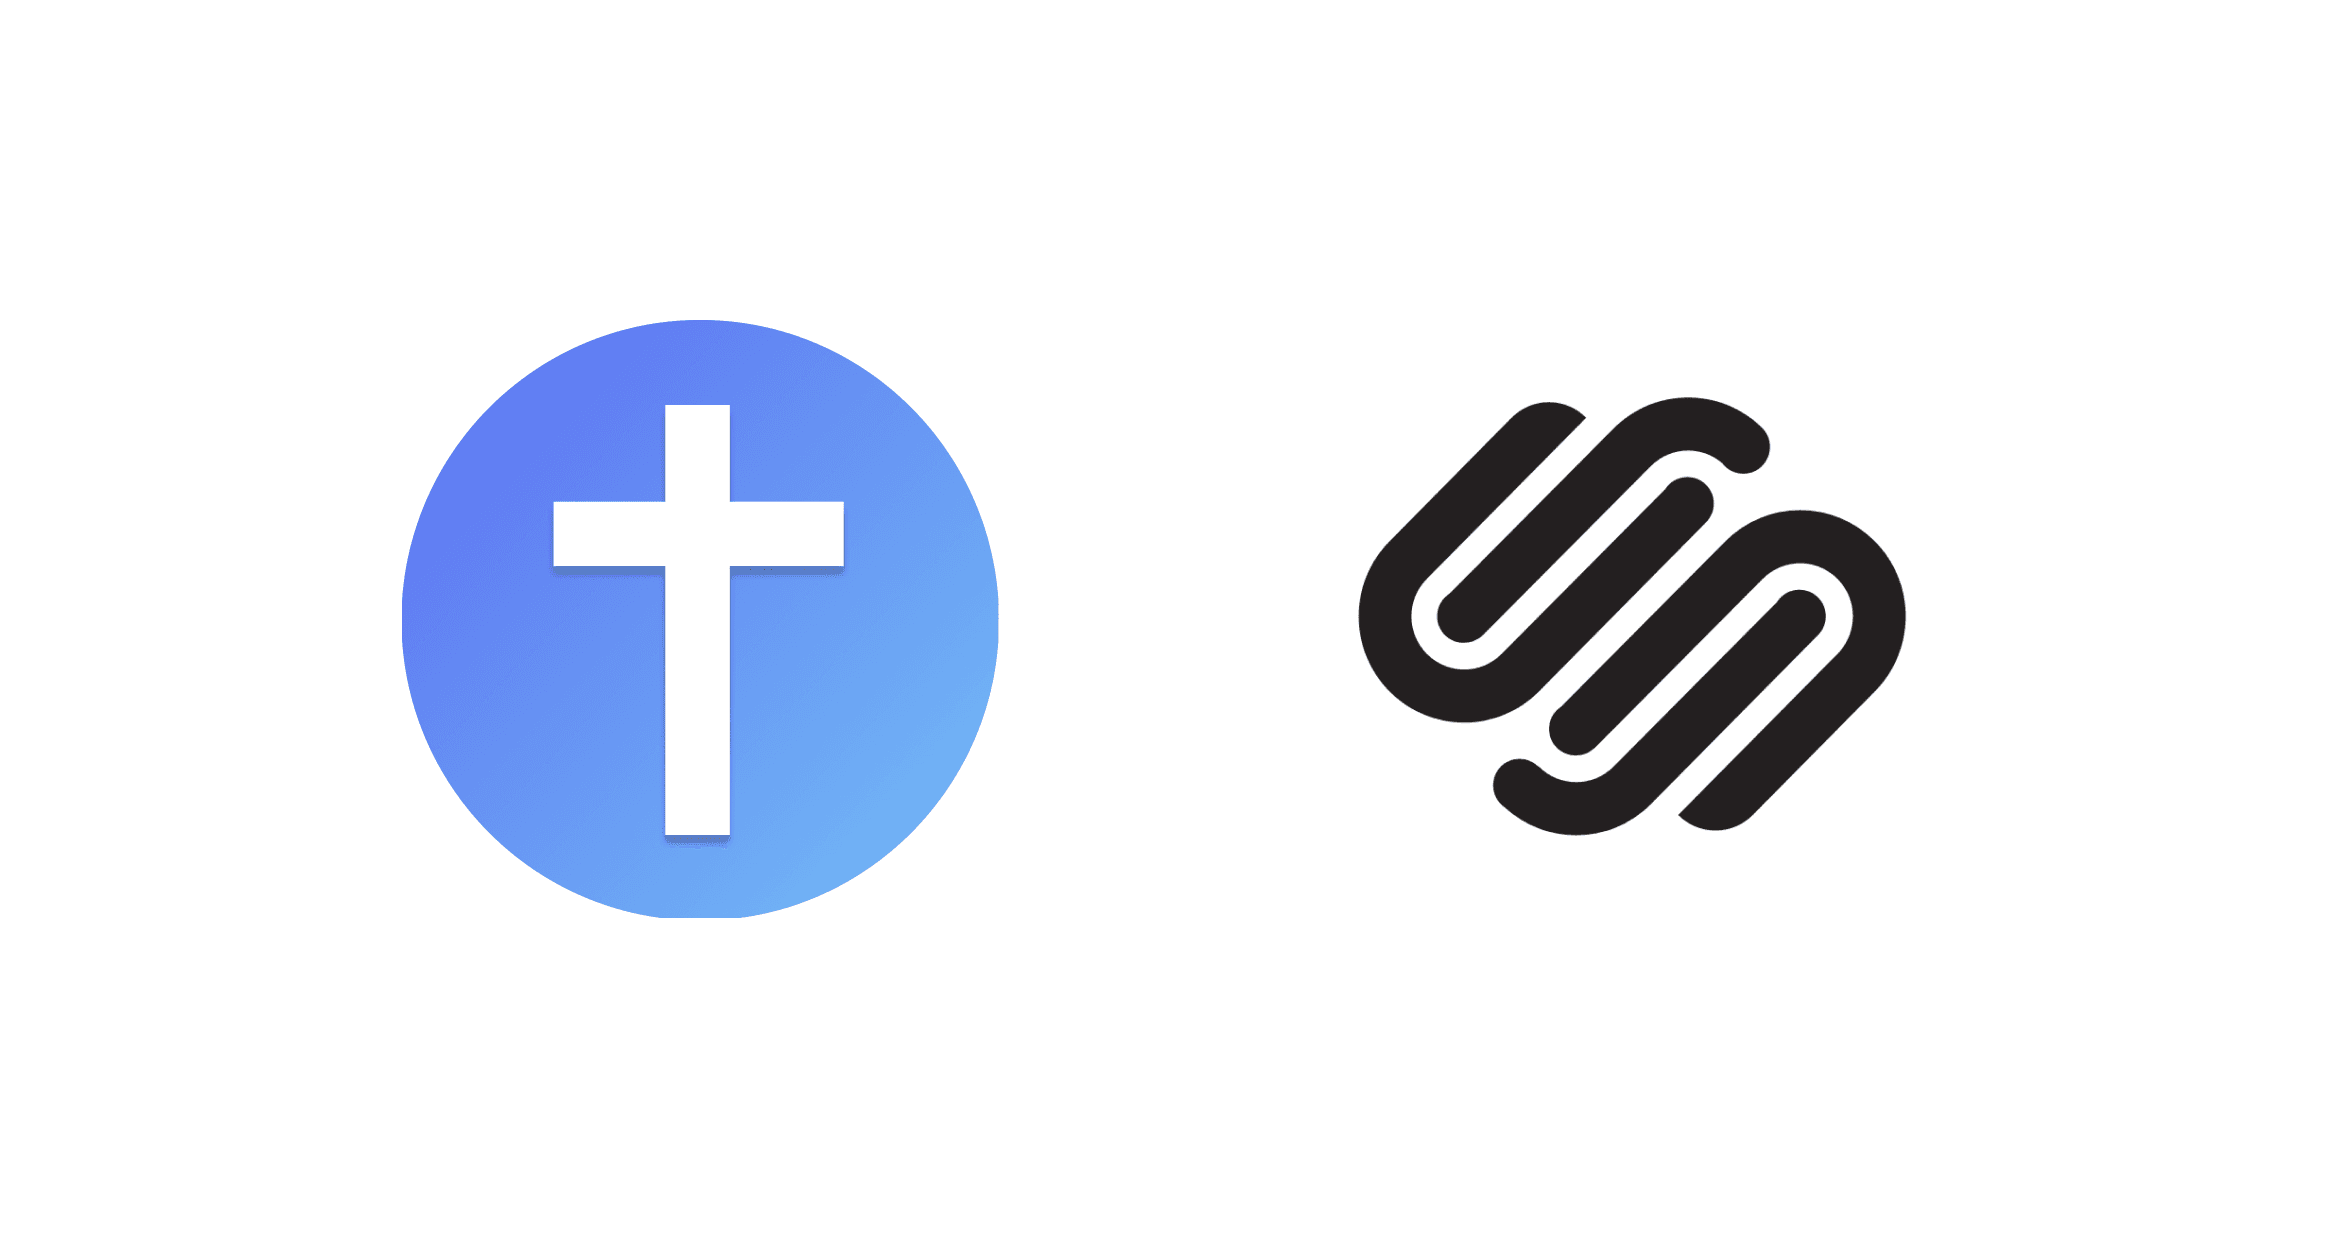 The Squarespace logo and the Faith Forward logo side by side